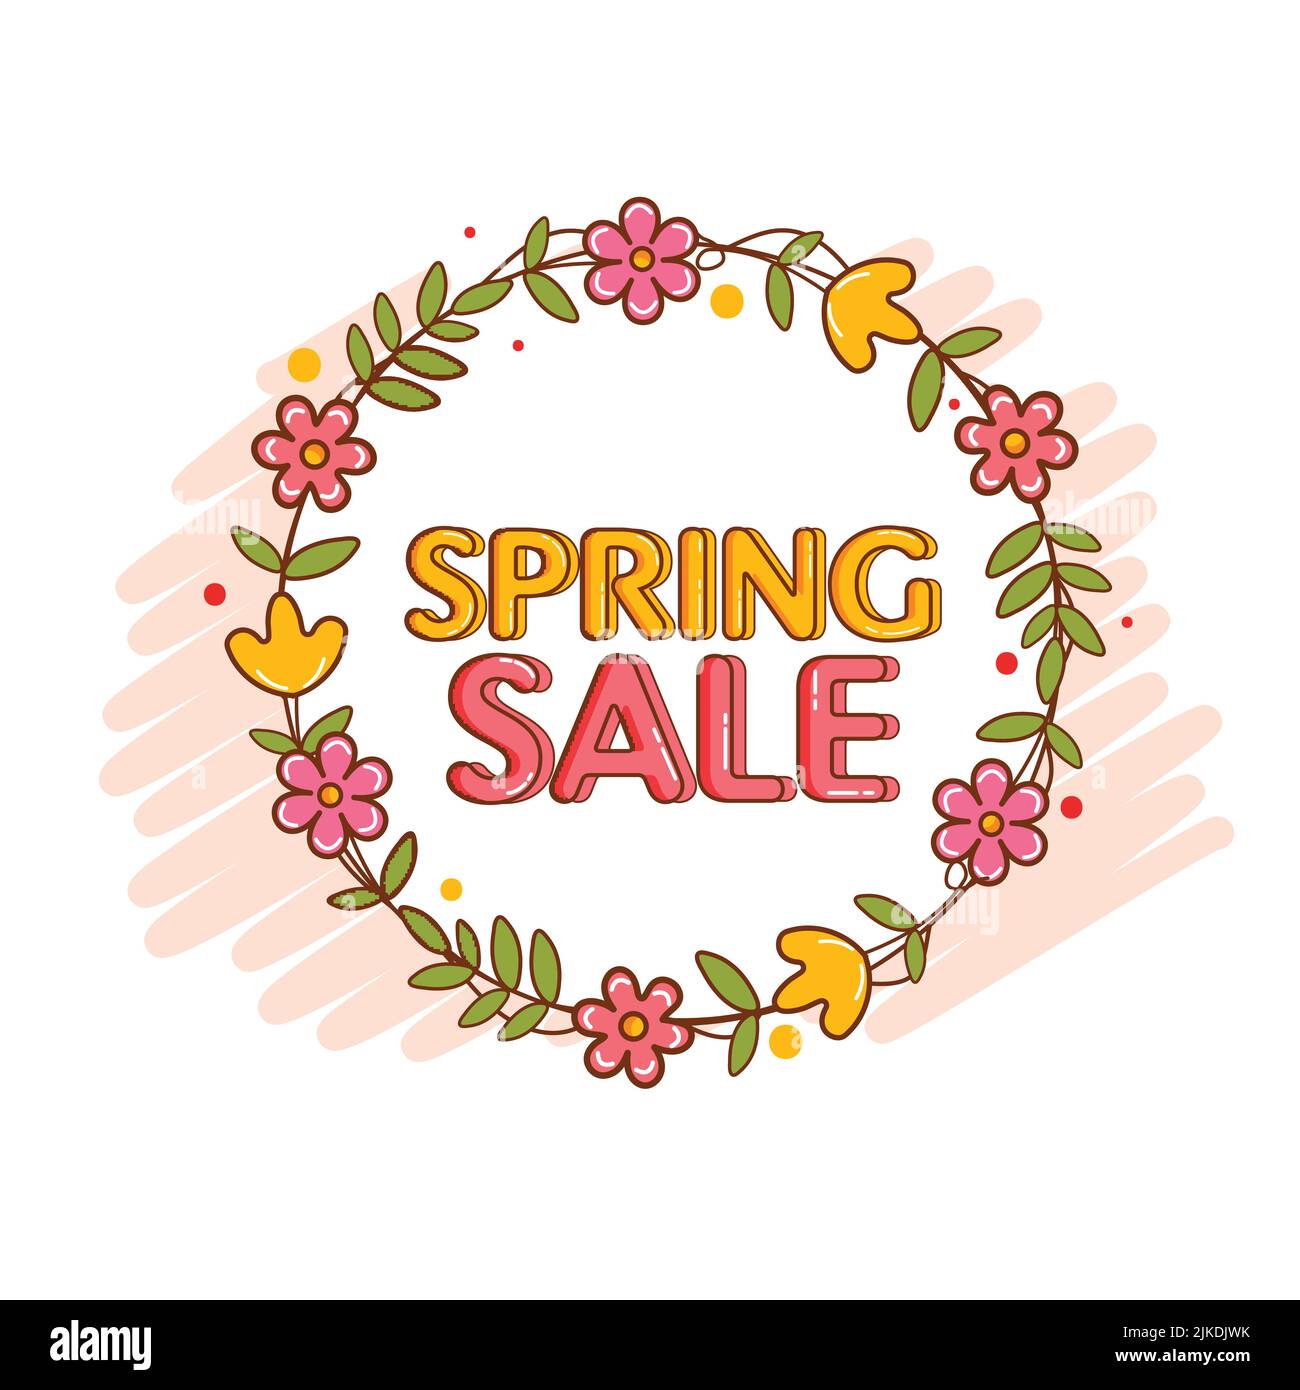 Spring Sale Poster Design With Floral Wreath On Pink And White Background. Stock Vector